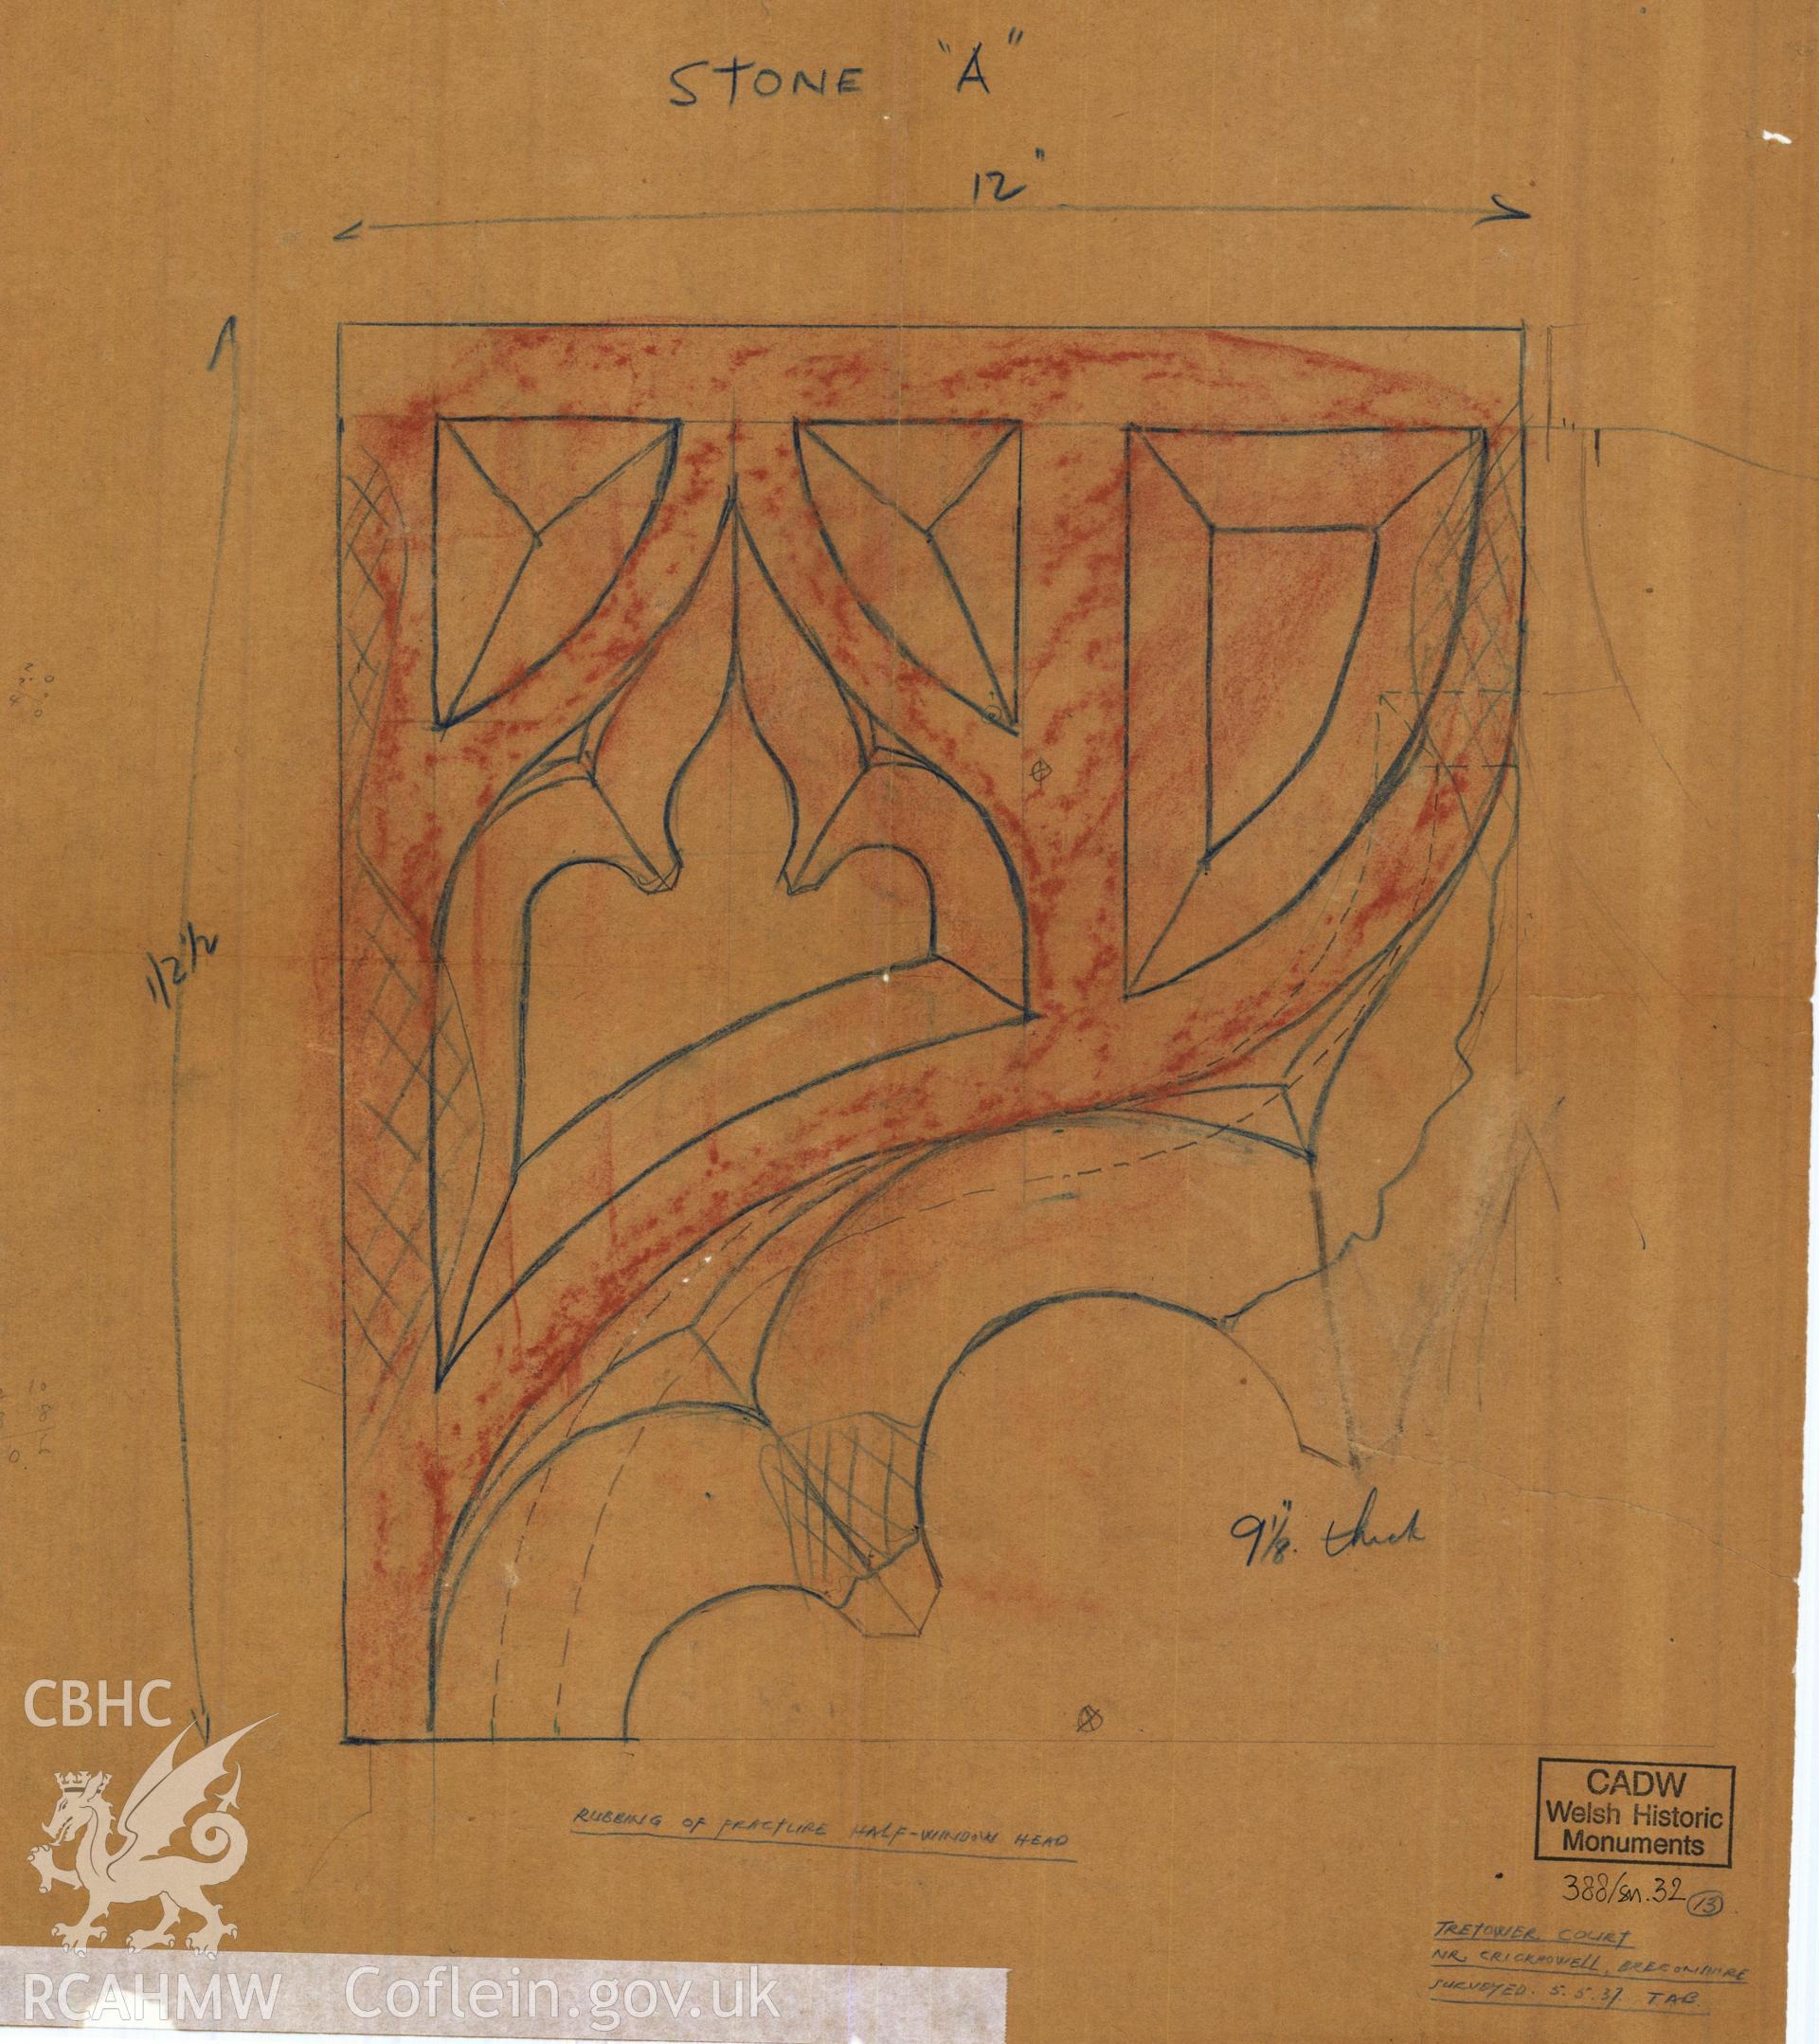 Cadw guardianship monument drawing of Tretower Court. Oriel window, wide tracery. Cadw Ref. No:388/sn.32. Scale 1:1.